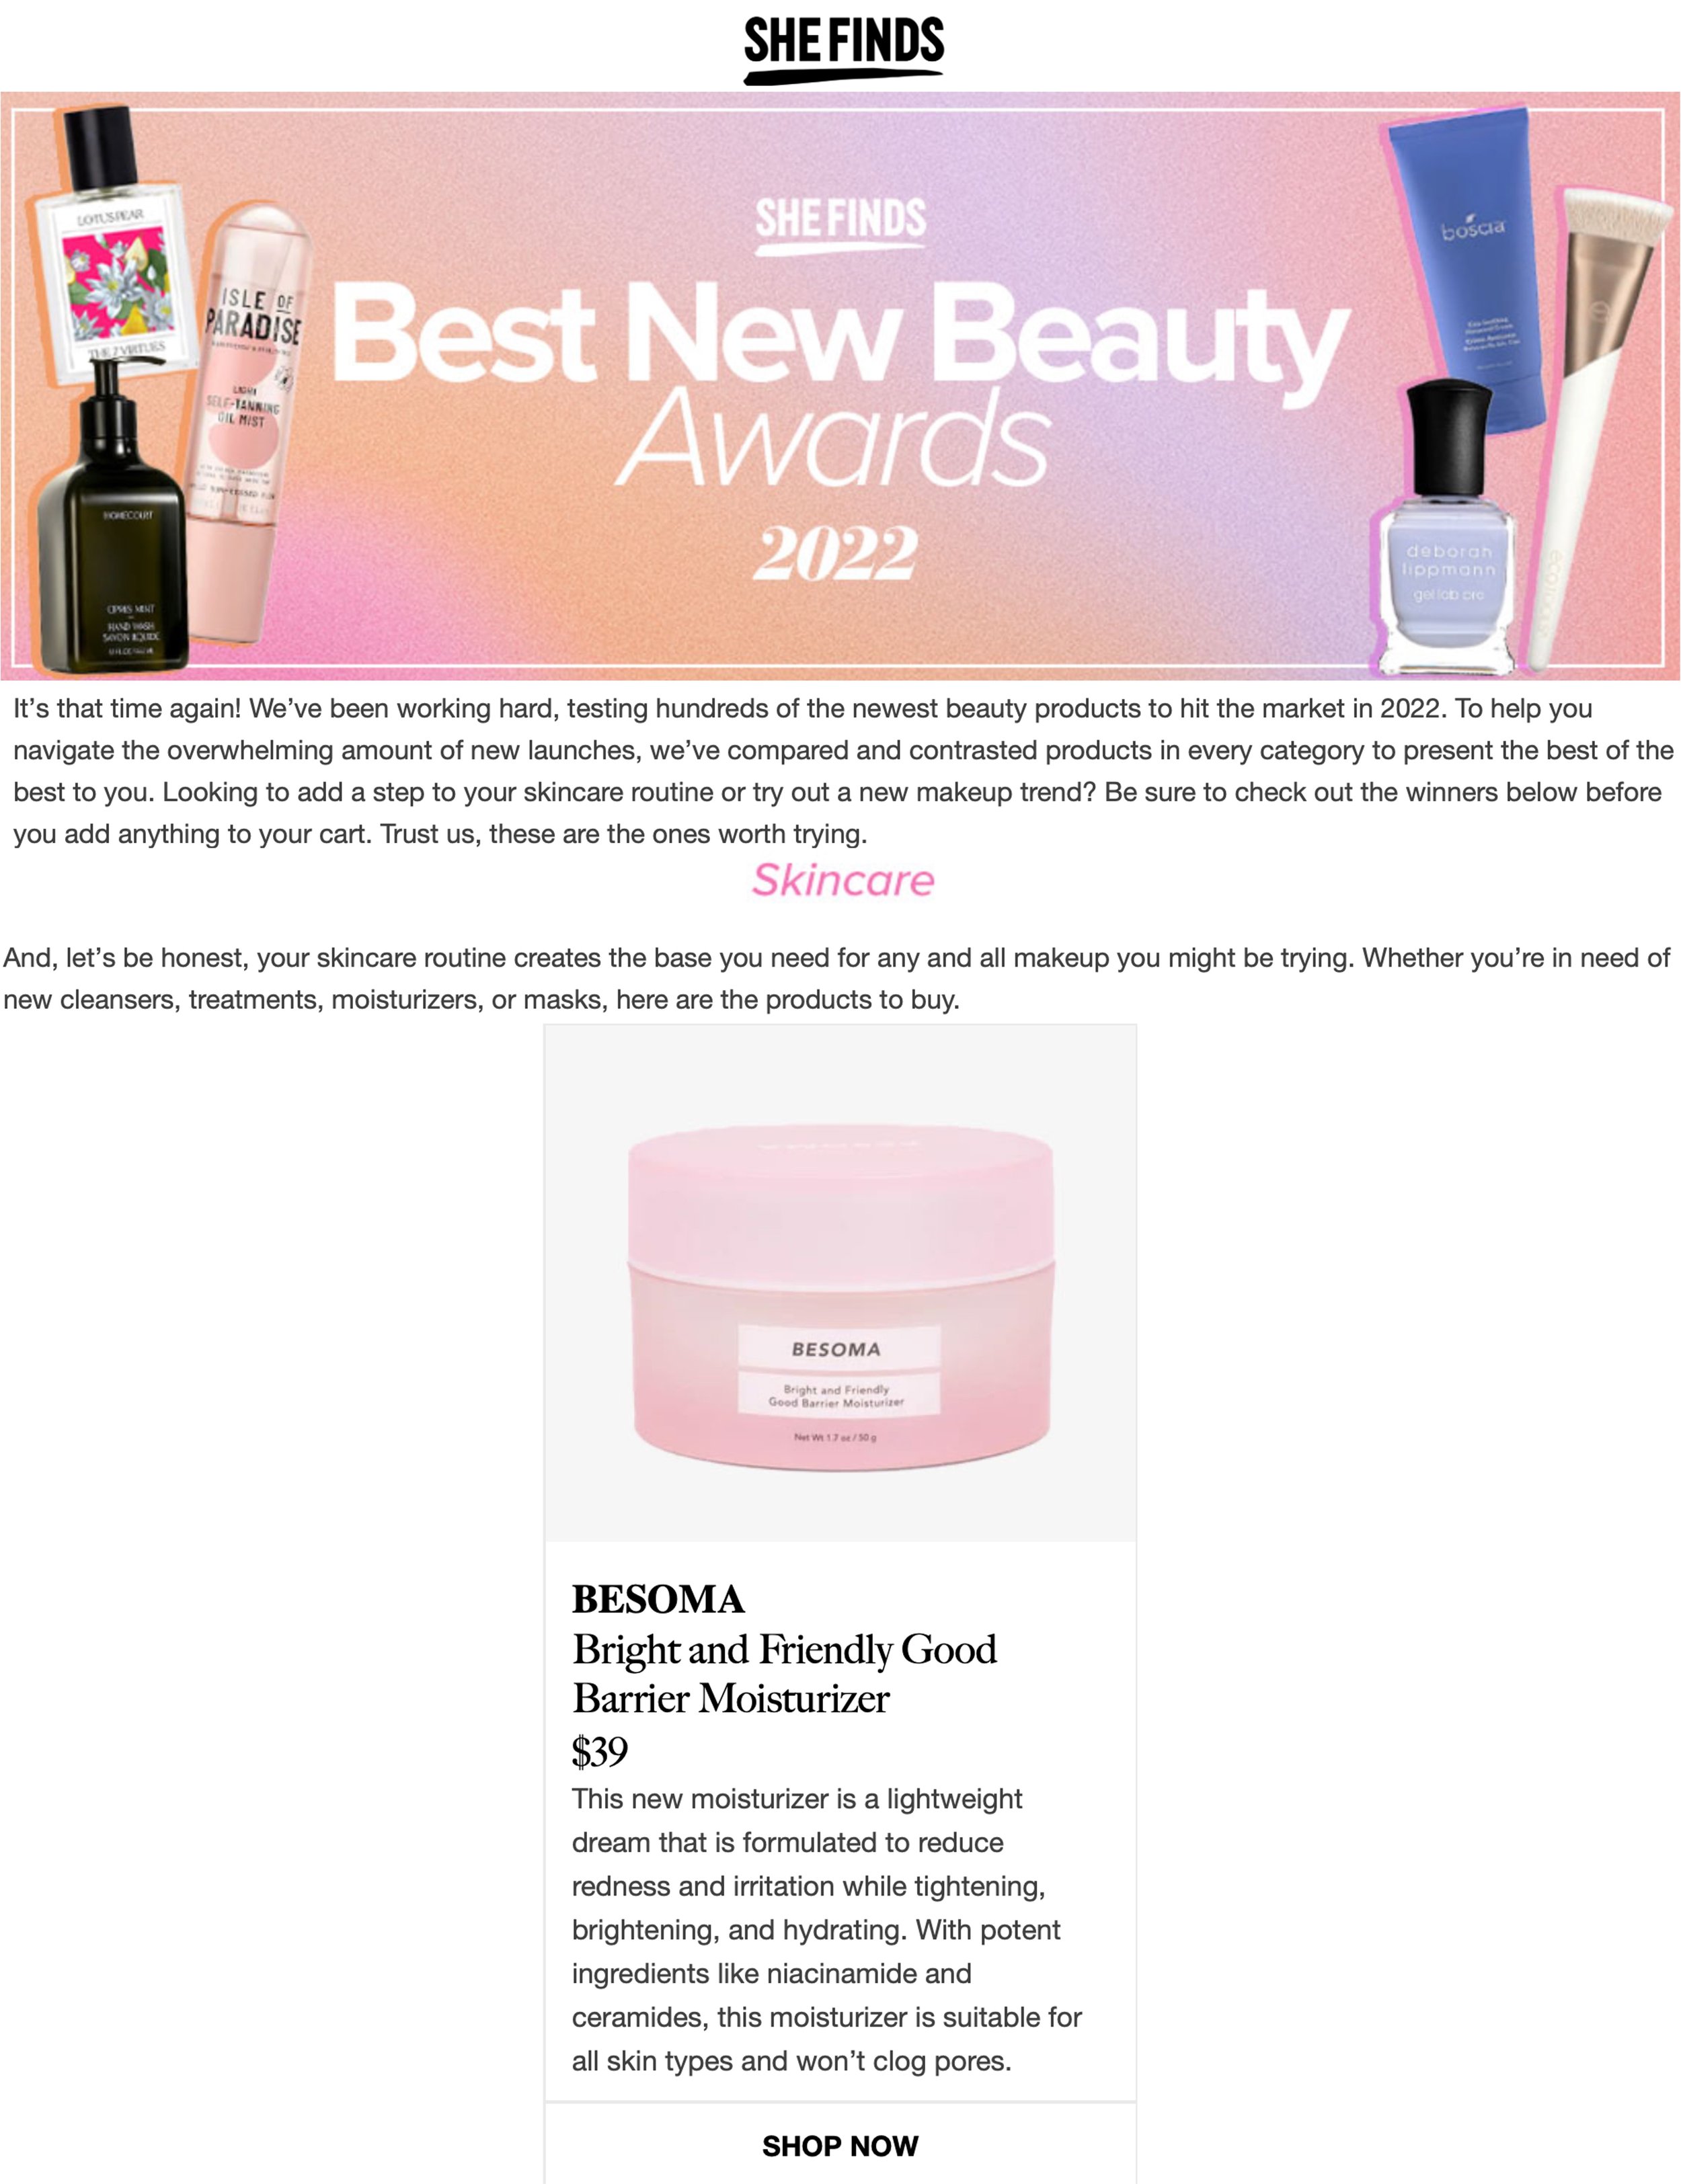 She Finds Best New Beauty Awards x BESOMA x 6.2.22.jpg